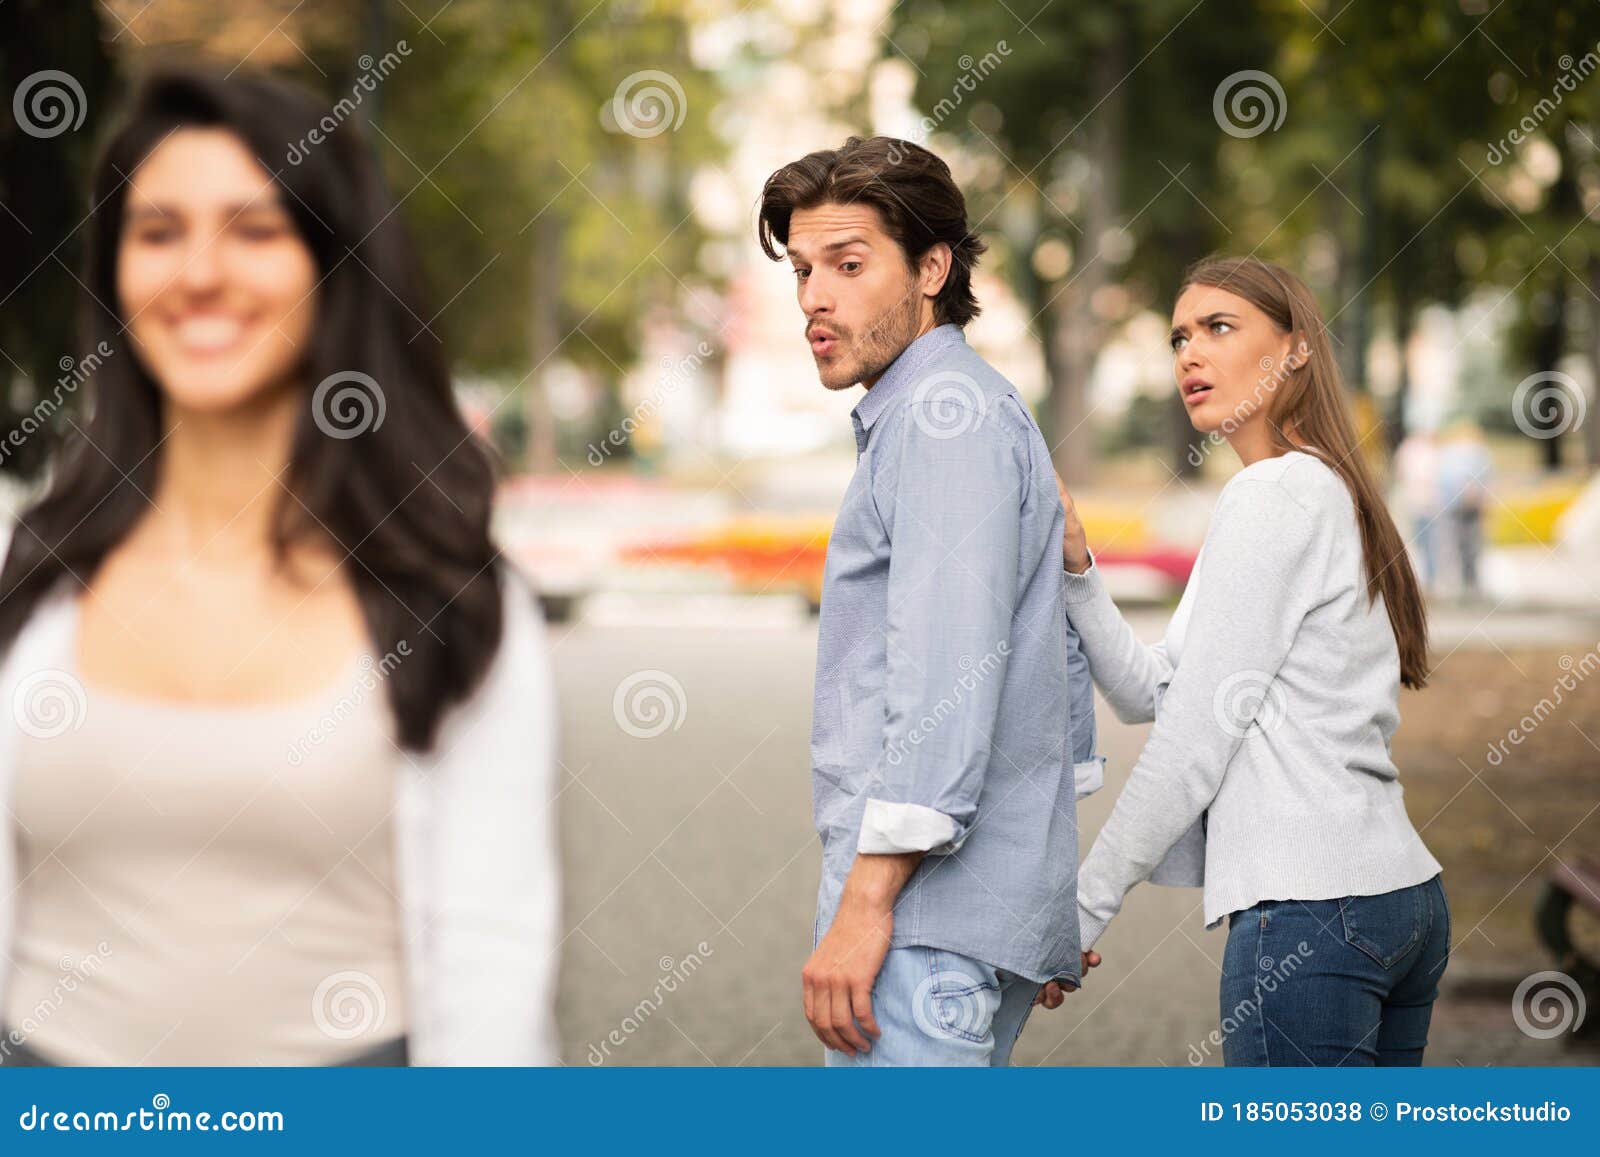 Jealous Girlfriend Being Suspicious Indoor Shot Of Beautiful Curly Haired Caucasian Girl